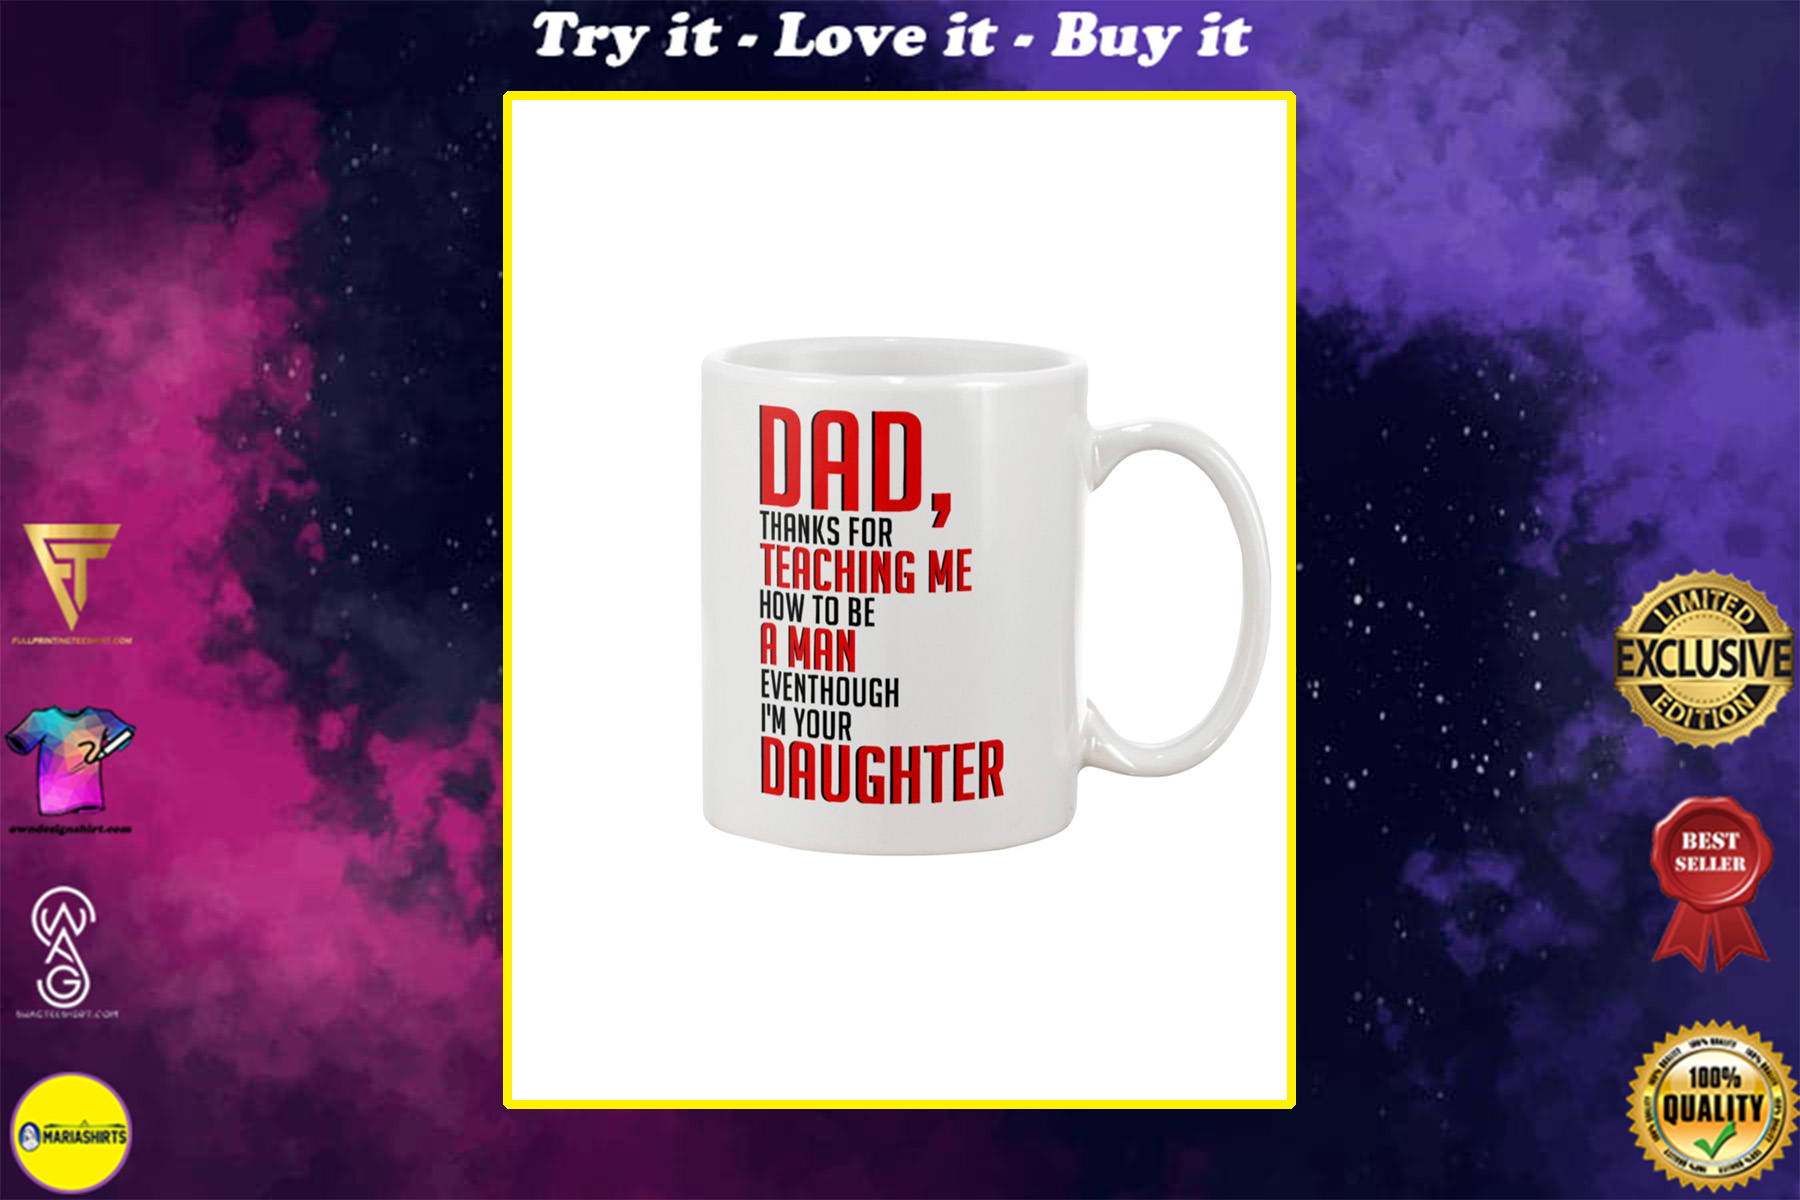 dad thanks for teaching me how to be a man even though im your daughter mug